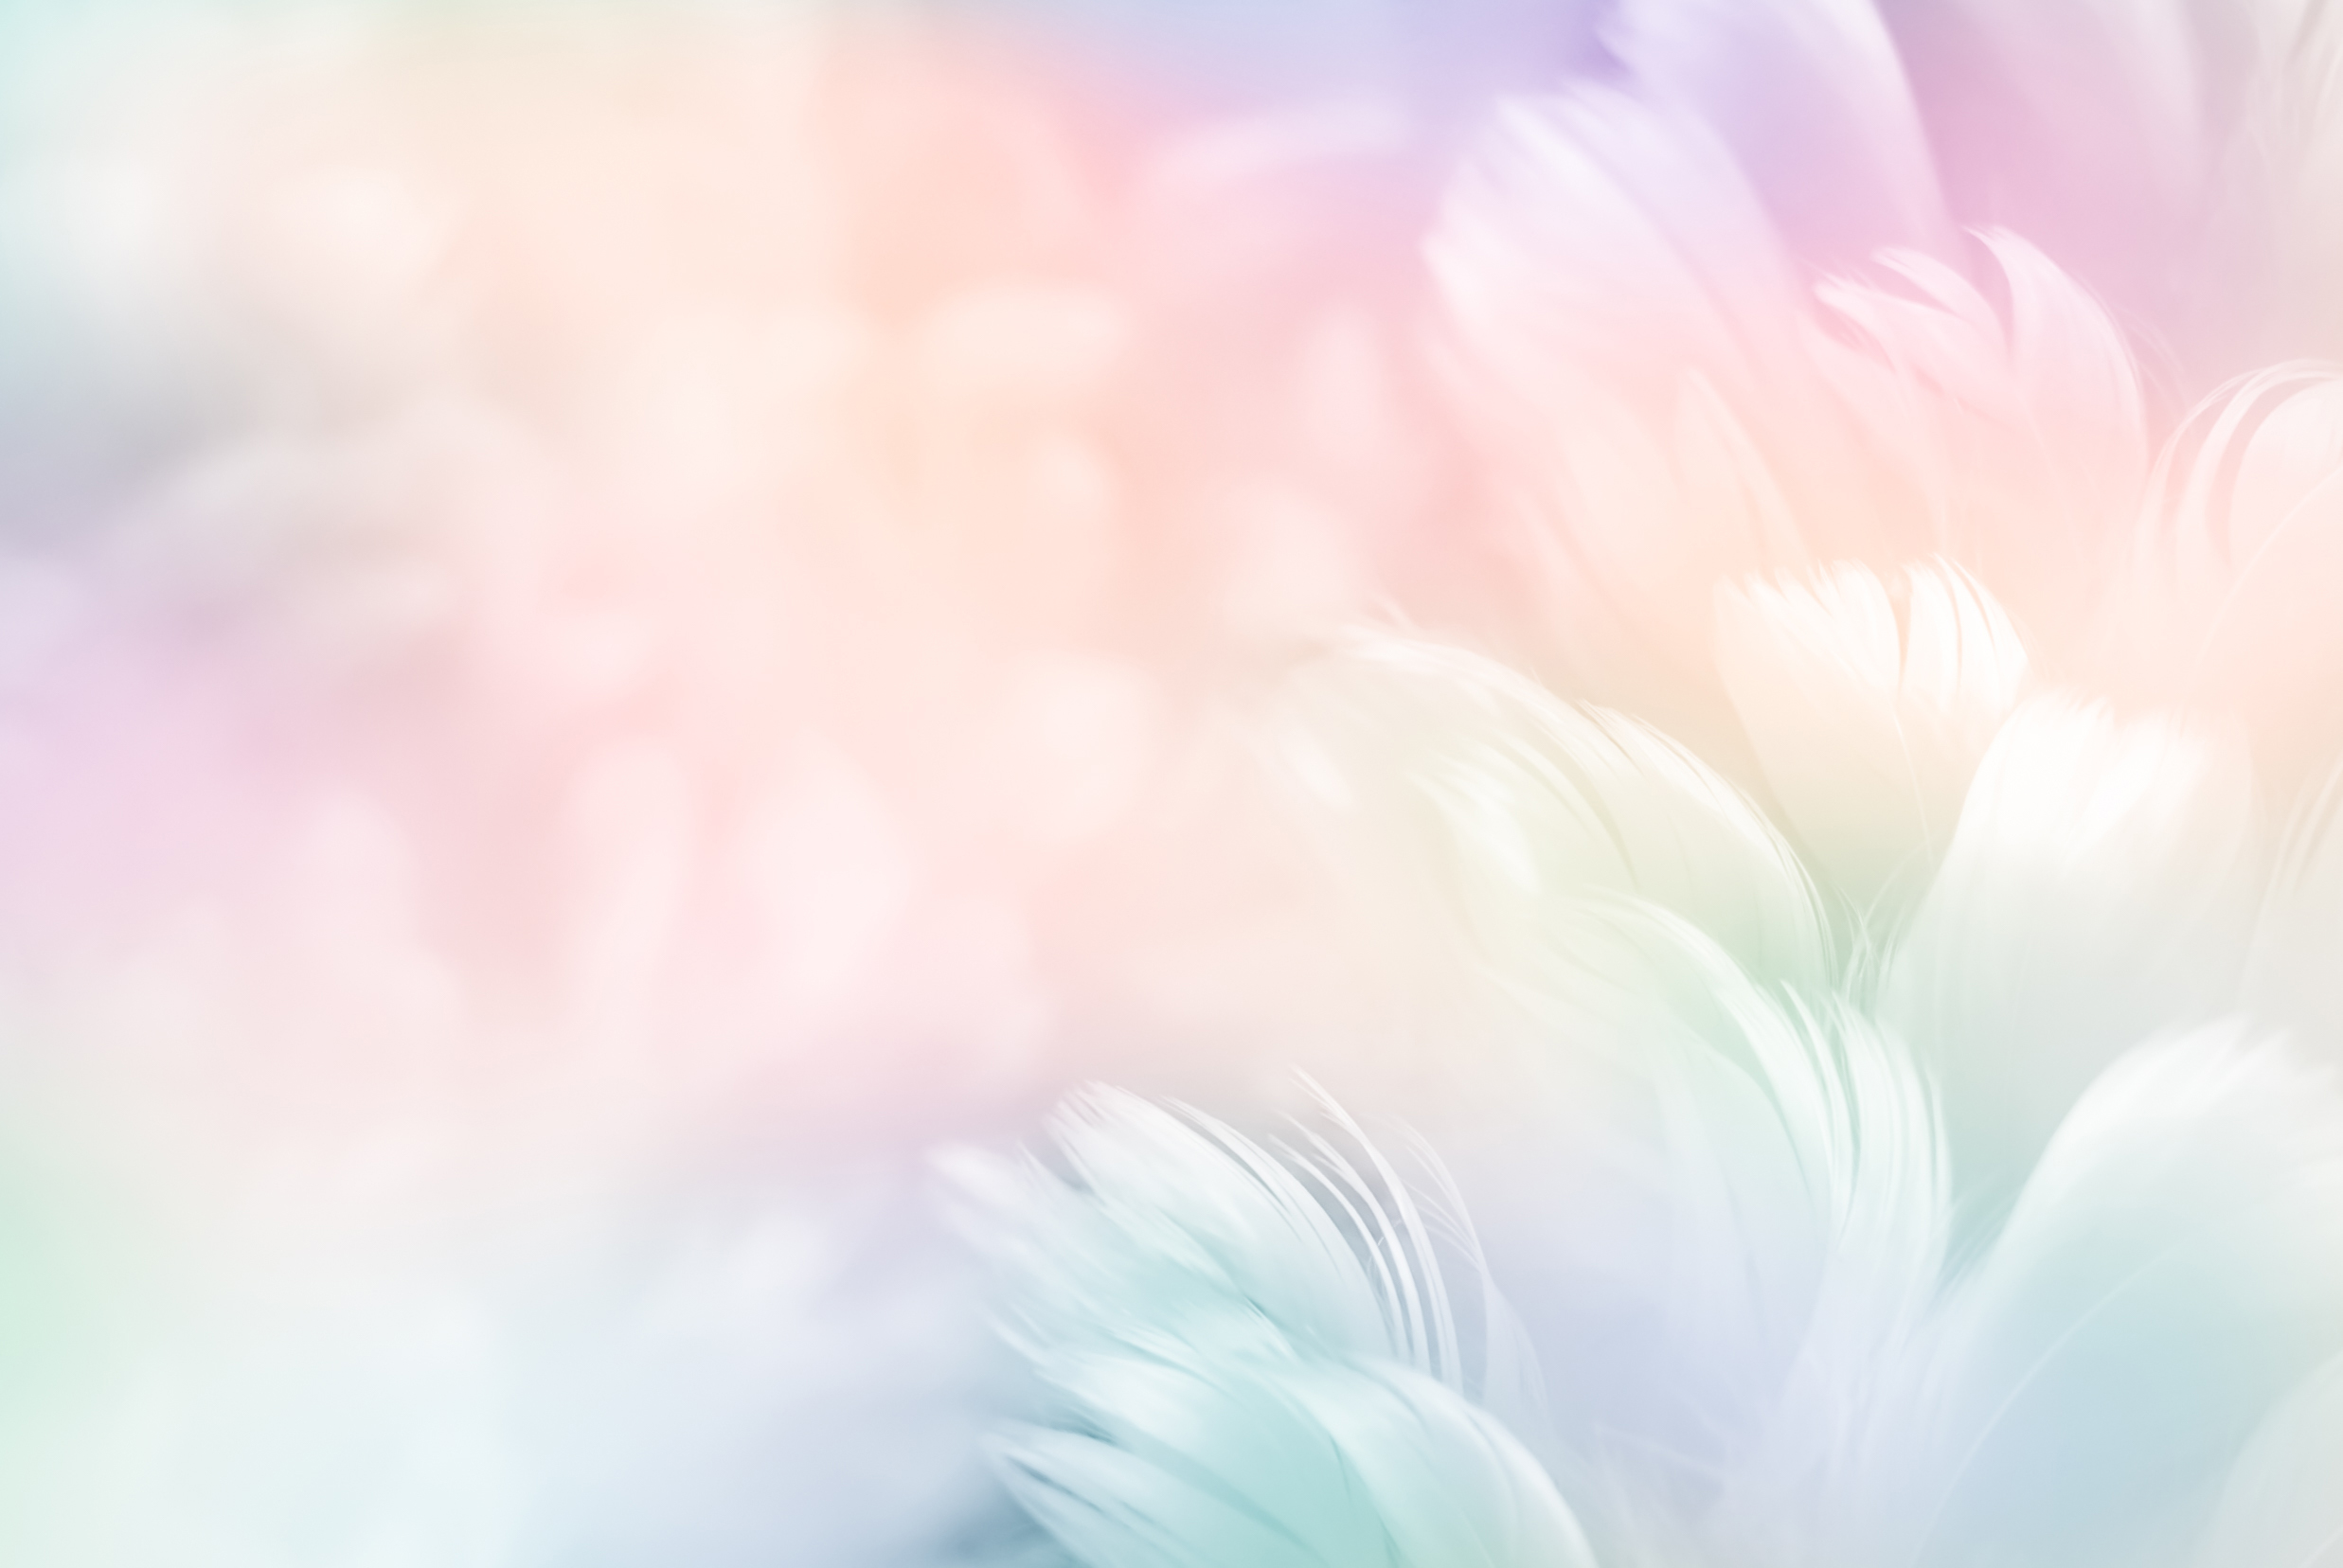 Rainbow feather abstract background.